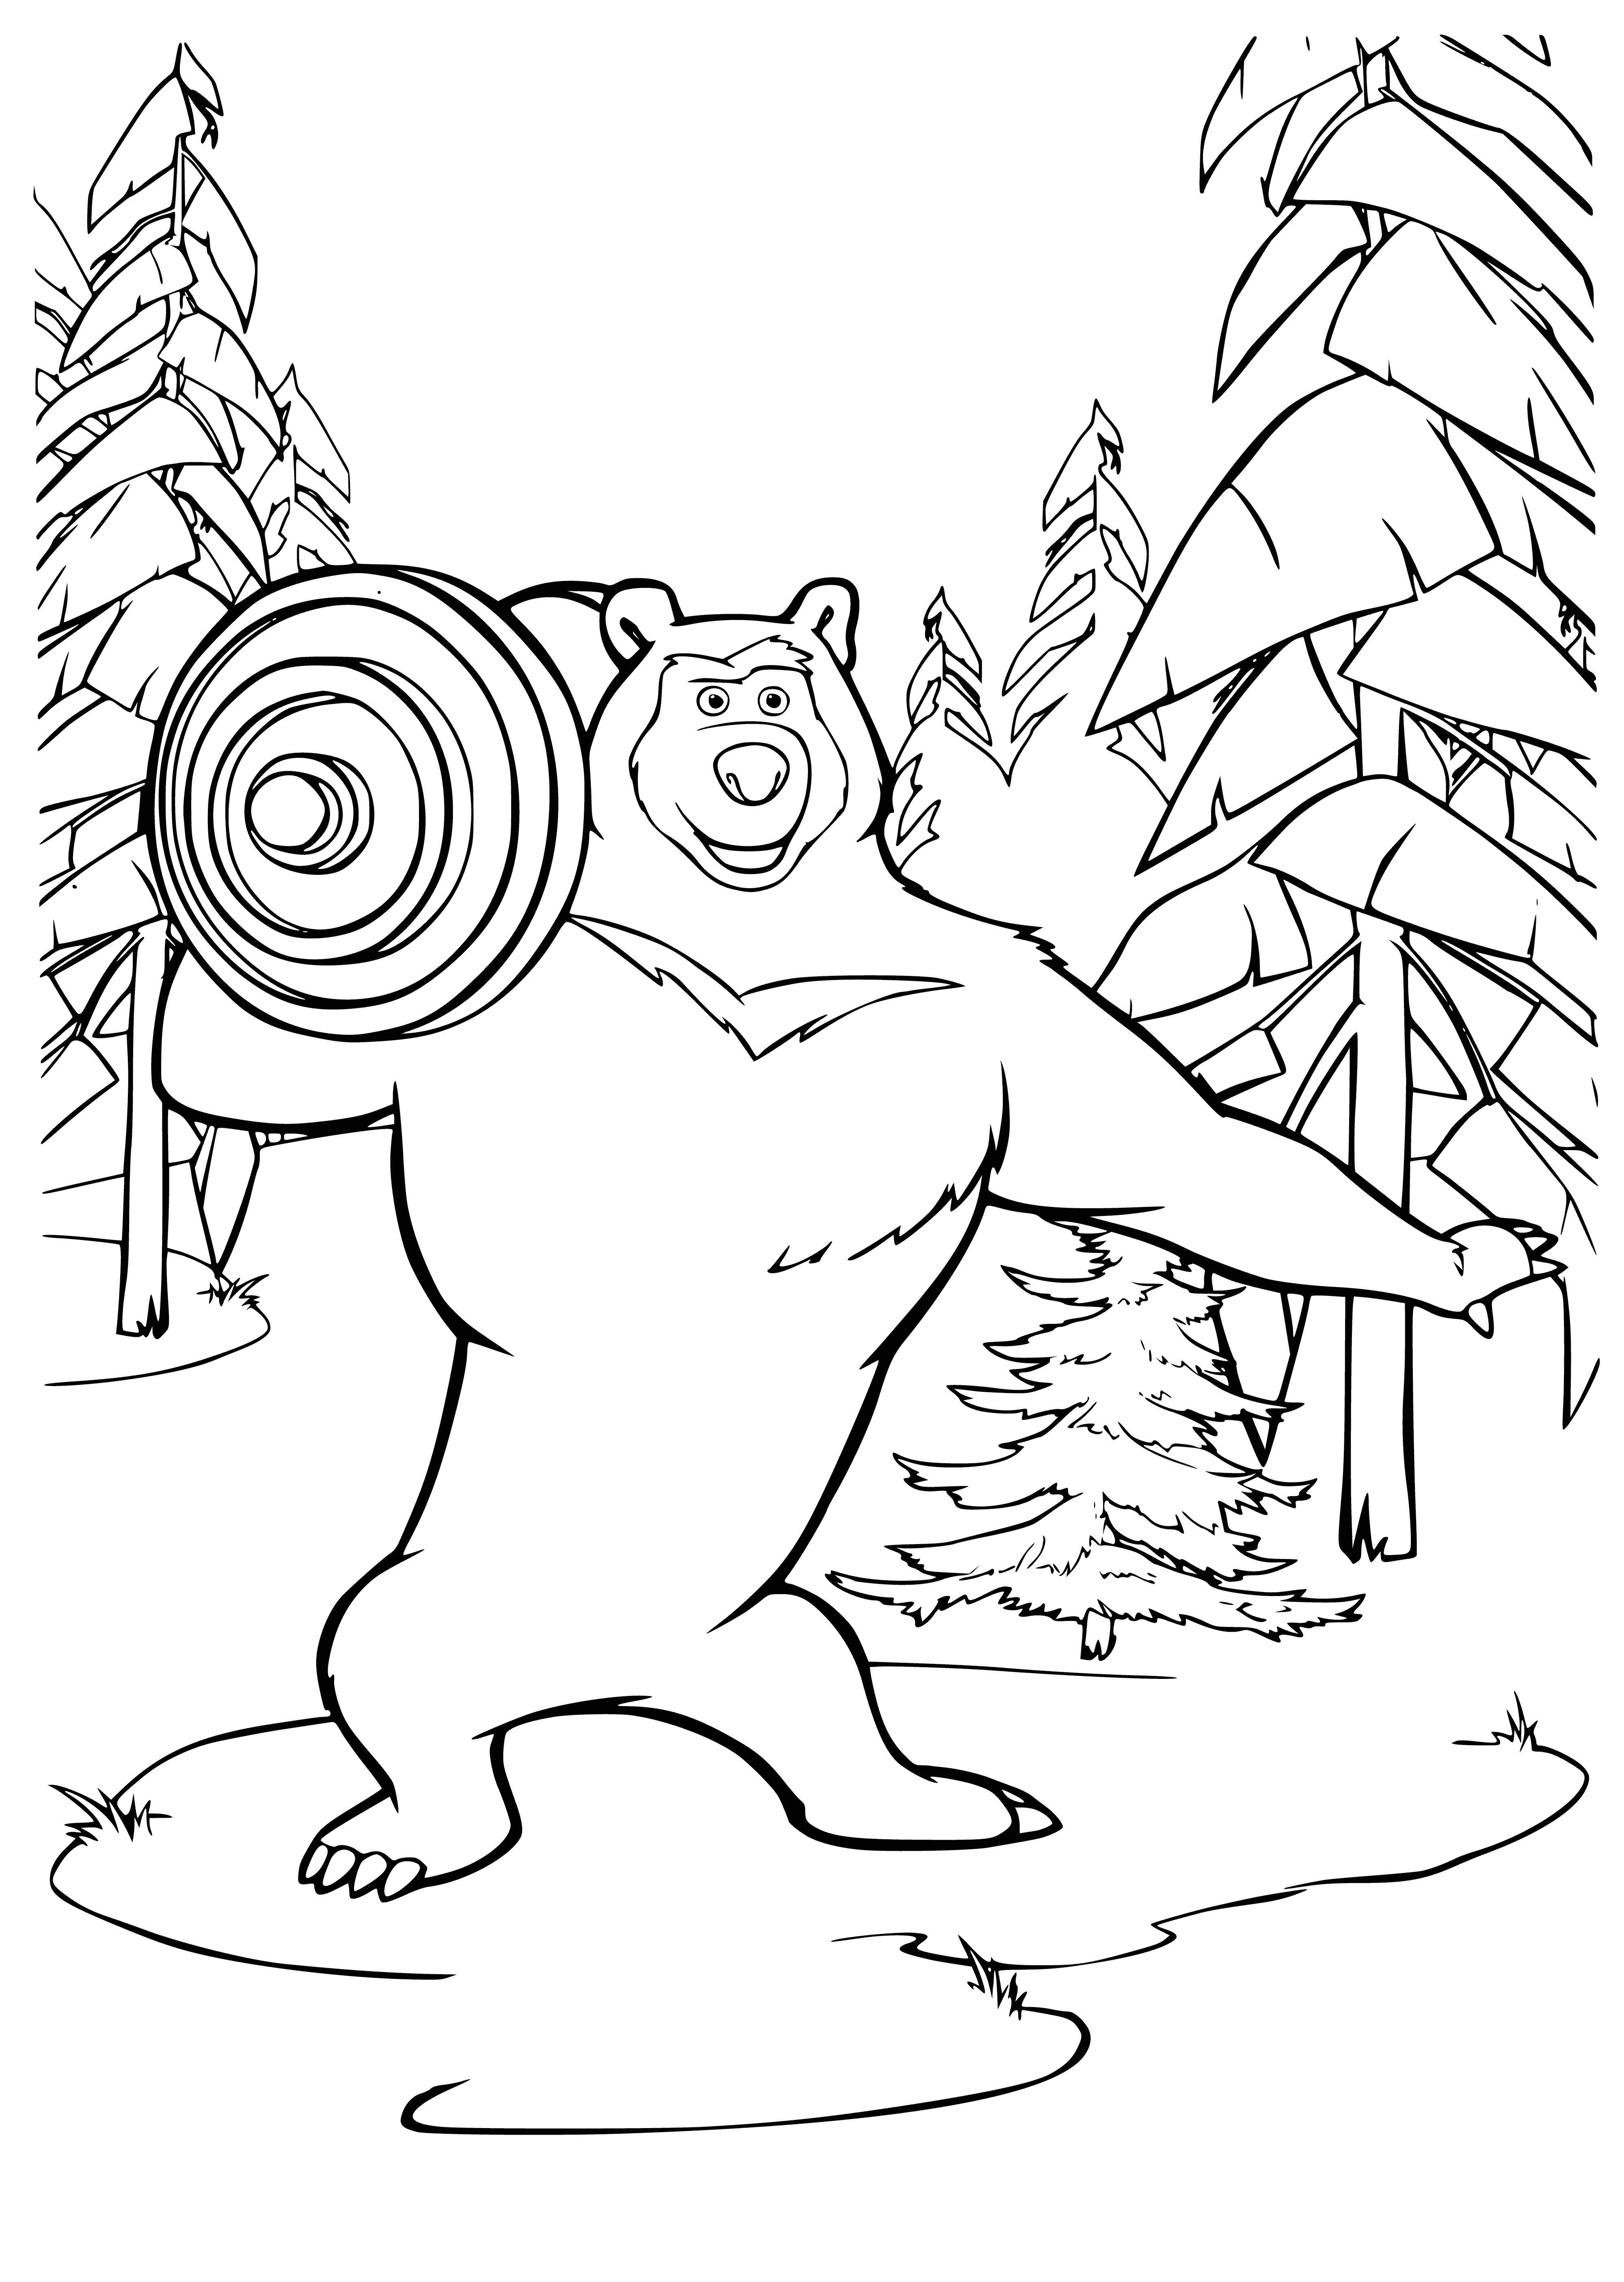 coloring page: The tall bear is looming over Masha, its brown fur coat contrasting her fear-filled expression.